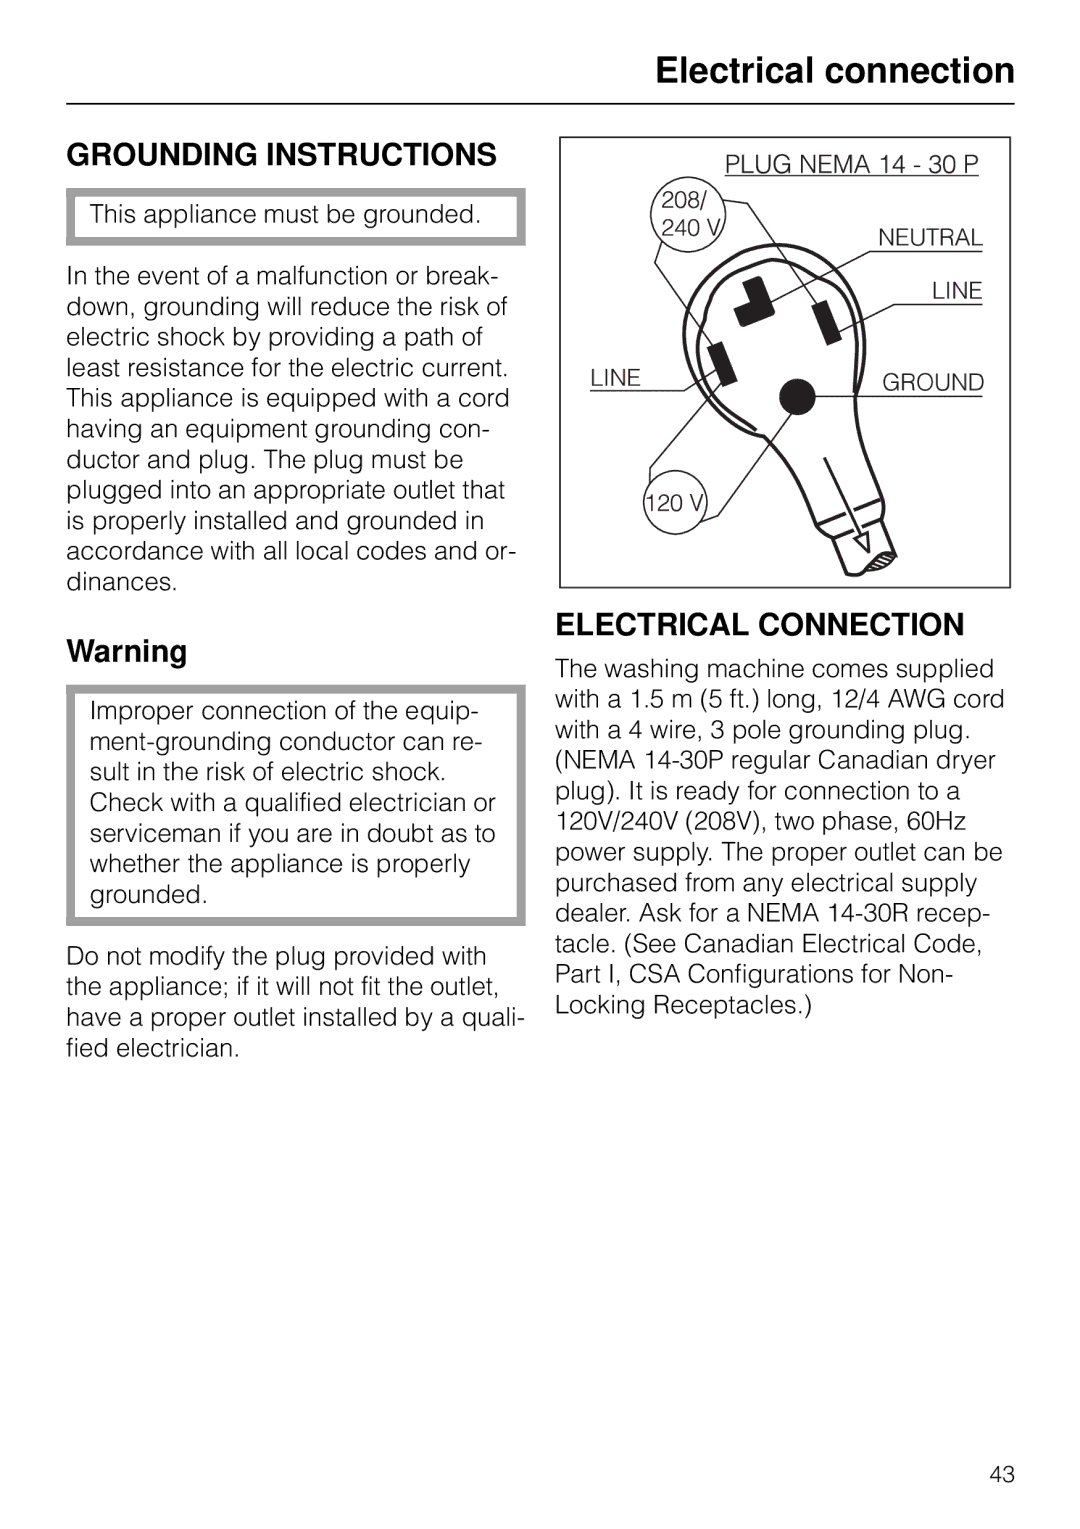 Miele W 1918 operating instructions Electrical connection, Grounding Instructions, Electrical Connection 